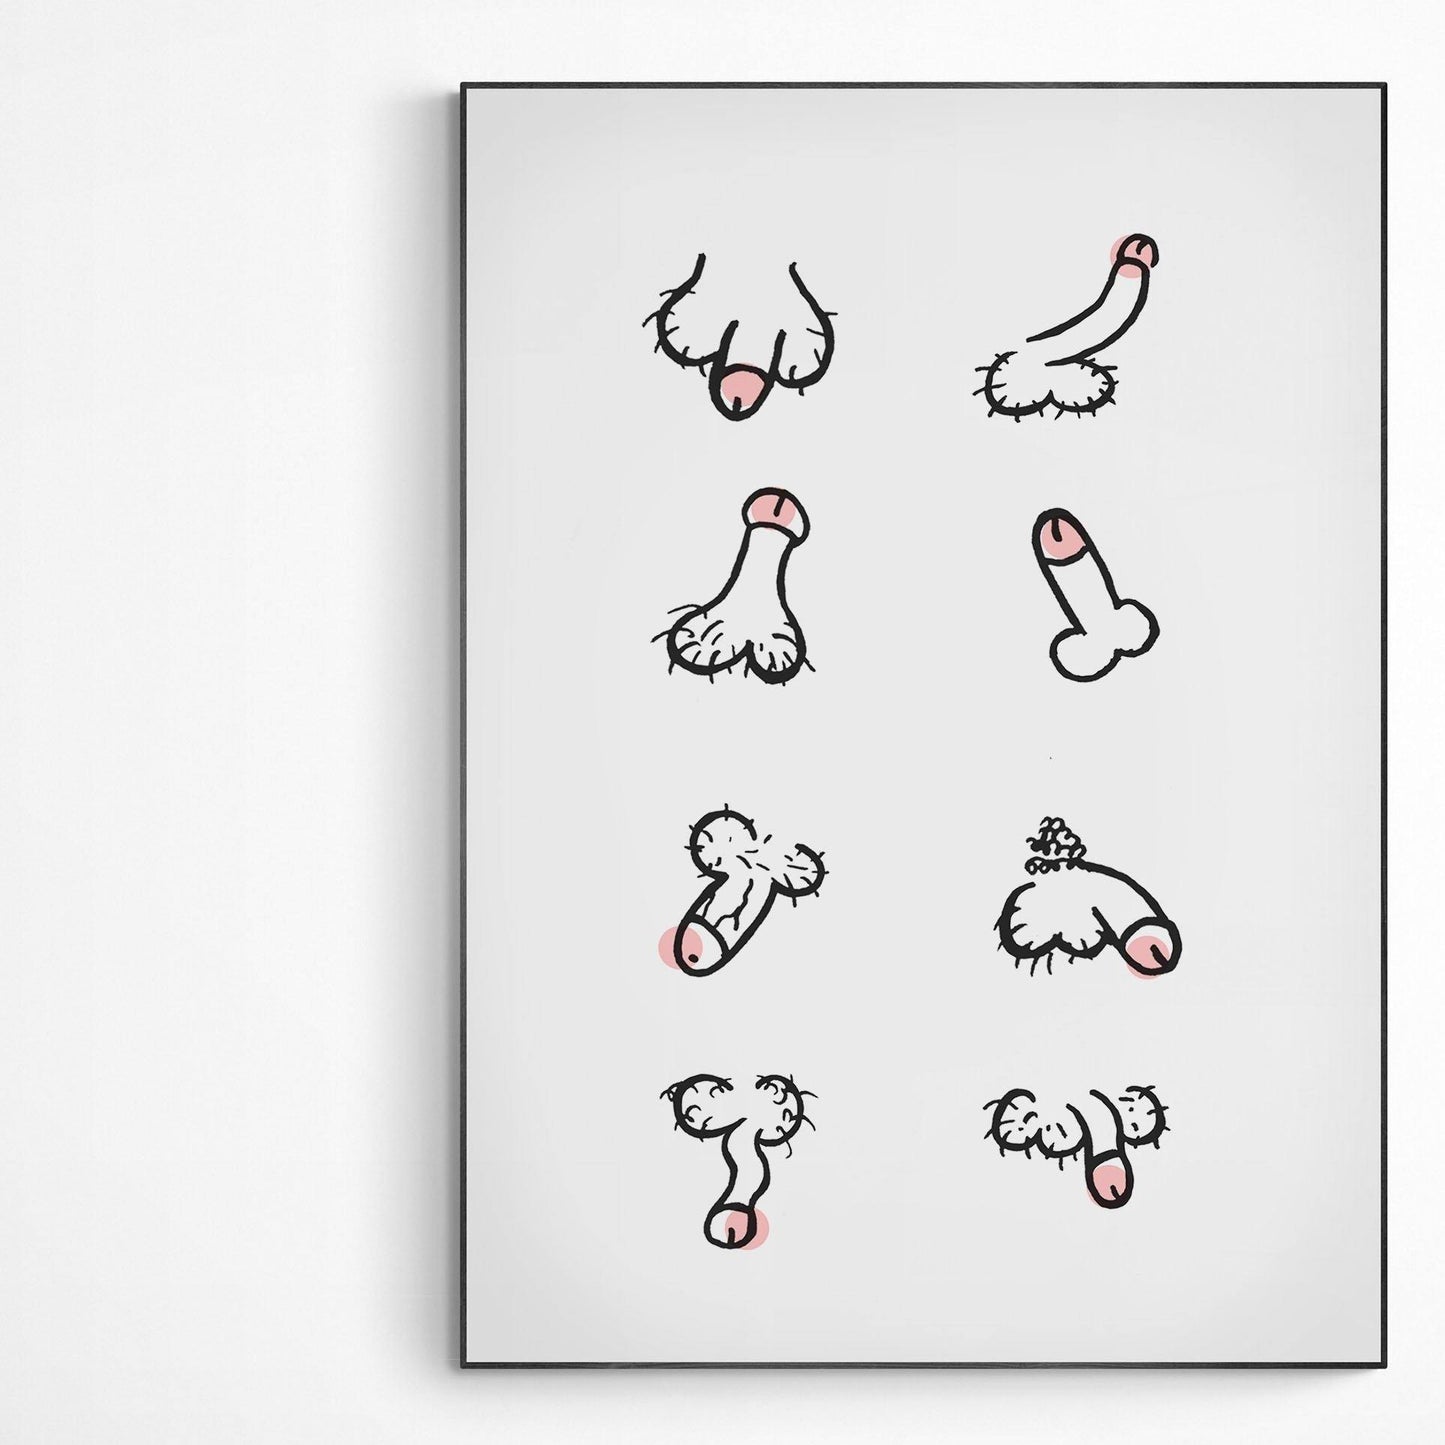 Penis Collection Poster | Original Print Art | Motivational Poster Wall Art Decor | Greeting Card Gifts | Variety Sizes